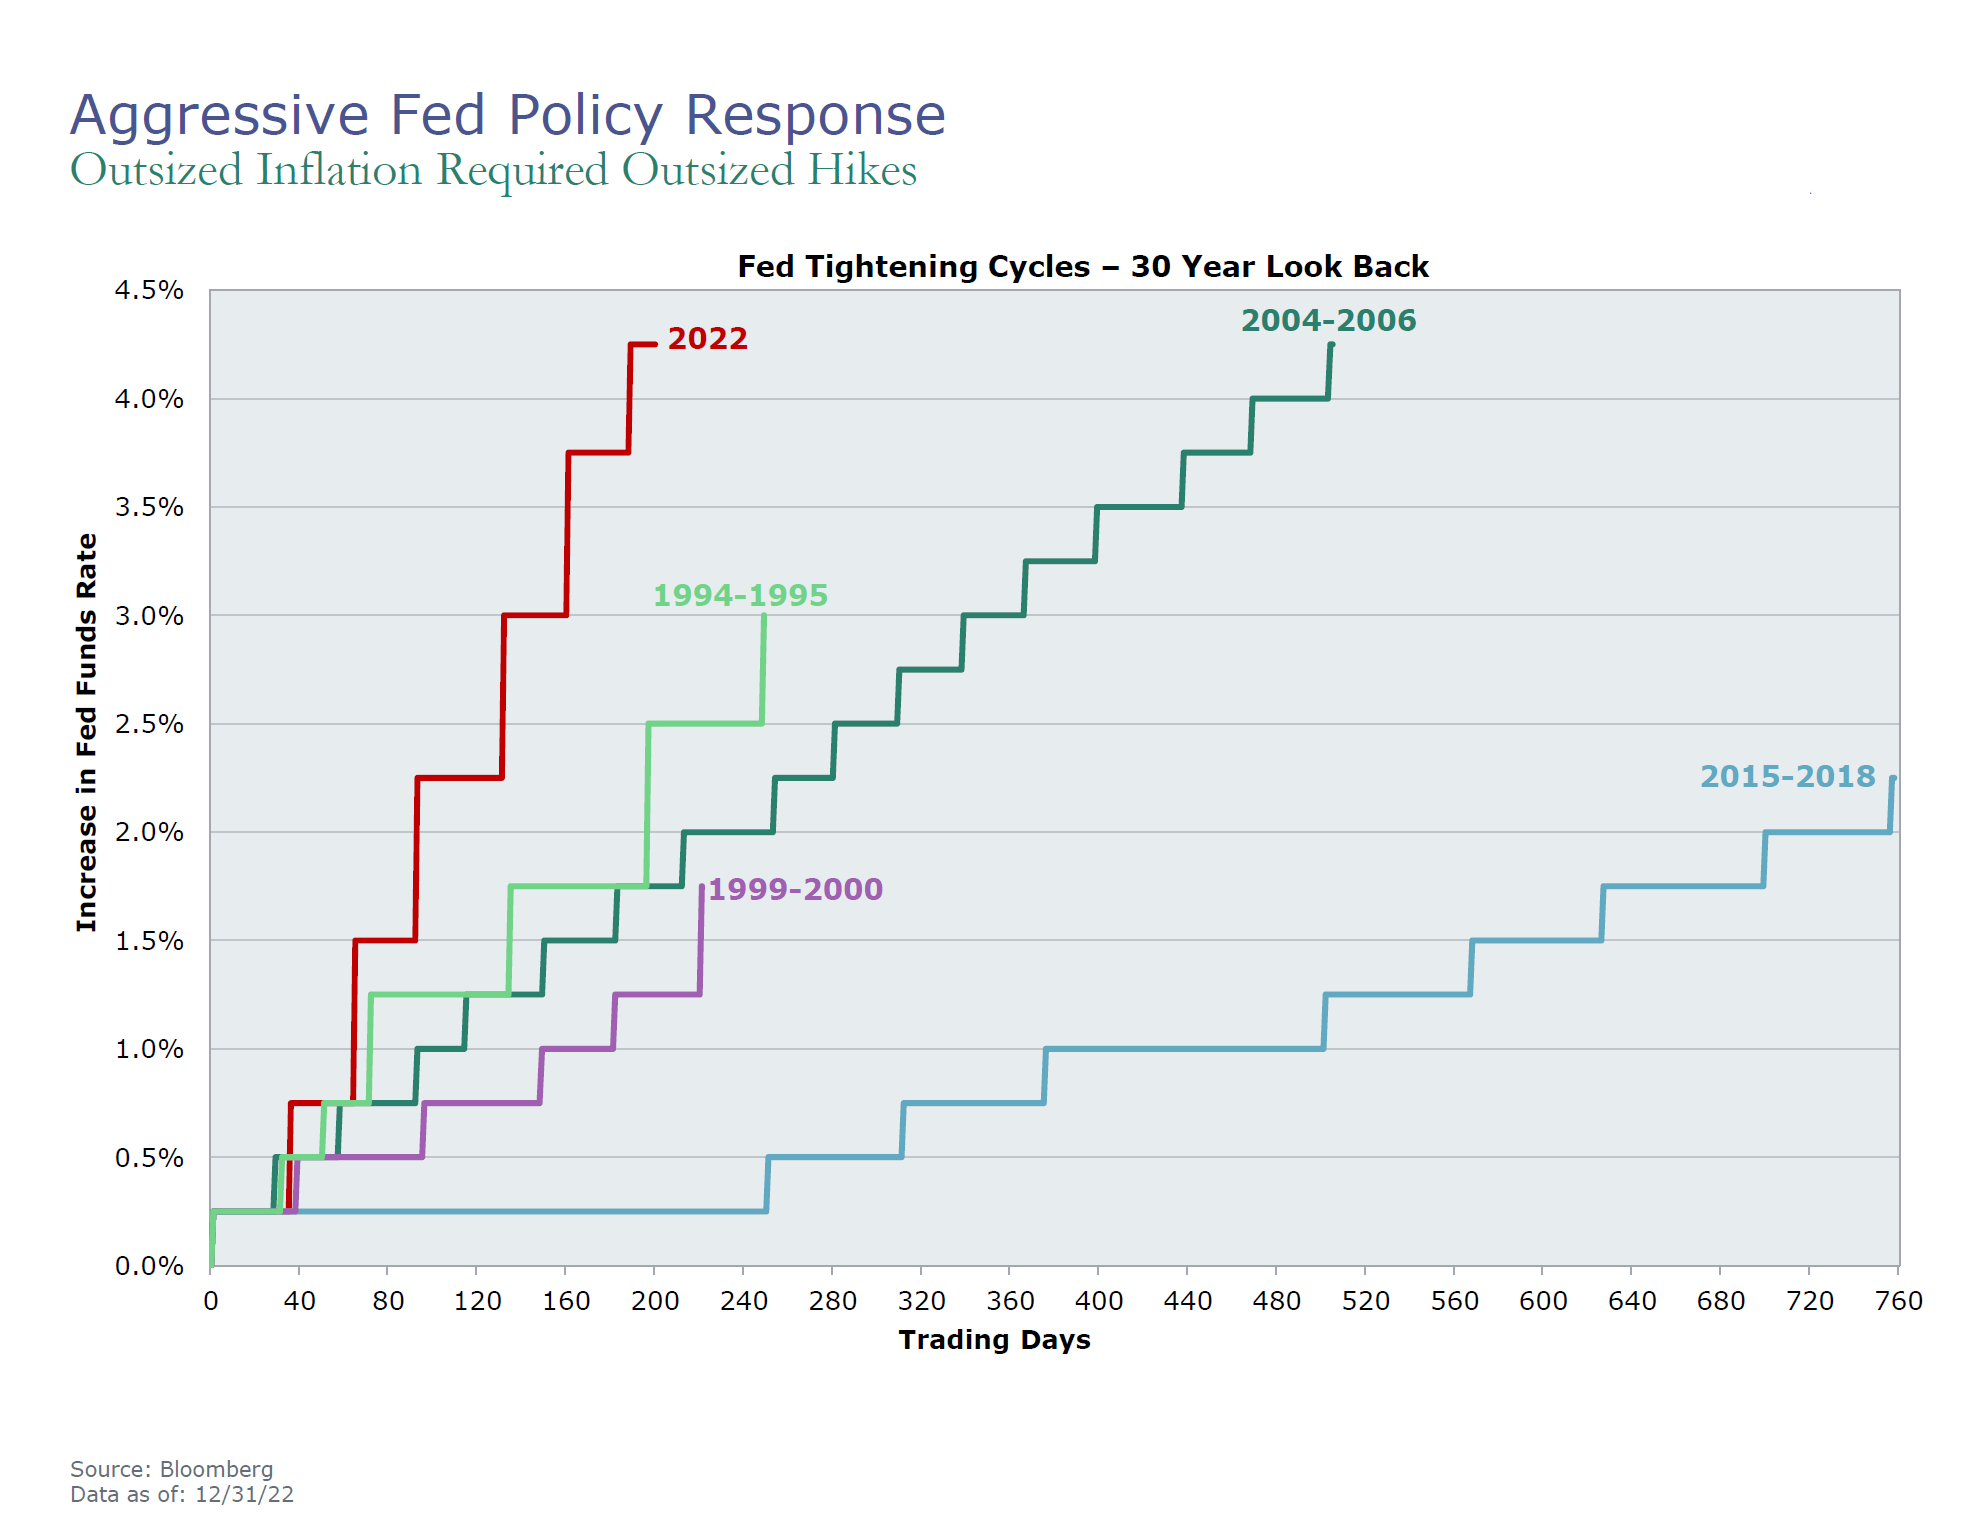 Chart: Aggressive Fed Policy Response, Fed Tightening Cycles – 30 Year Look Back. Percentage of increase in Fed Funds Rate on left axis ranging from 0% to 4.5%, number of trading days on horizontal axis ranging from 0 to 760. 1994-1995 the Fed Funds Rate increased from 0.0% to 3.0% over a period of 250 trading days. 1999-2000 the Fed Funds Rate increased from 0.25% to 1.75% over a period of 180 trading days. 2004-2006 the Fed Funds Rate increased from 0.25% to 4.25% over a period of 470 trading days. 2015-2018 the Fed Funds Rate increased from 0.25% to 2.25% over a period of 720 trading days.  2022 the Fed Funds Rate increased from 0.25% to 4.25% over a period of 160 trading days, the most aggressive rate hikes in the shortest number of trading days.   Source: Bloomberg as of 12/31/22